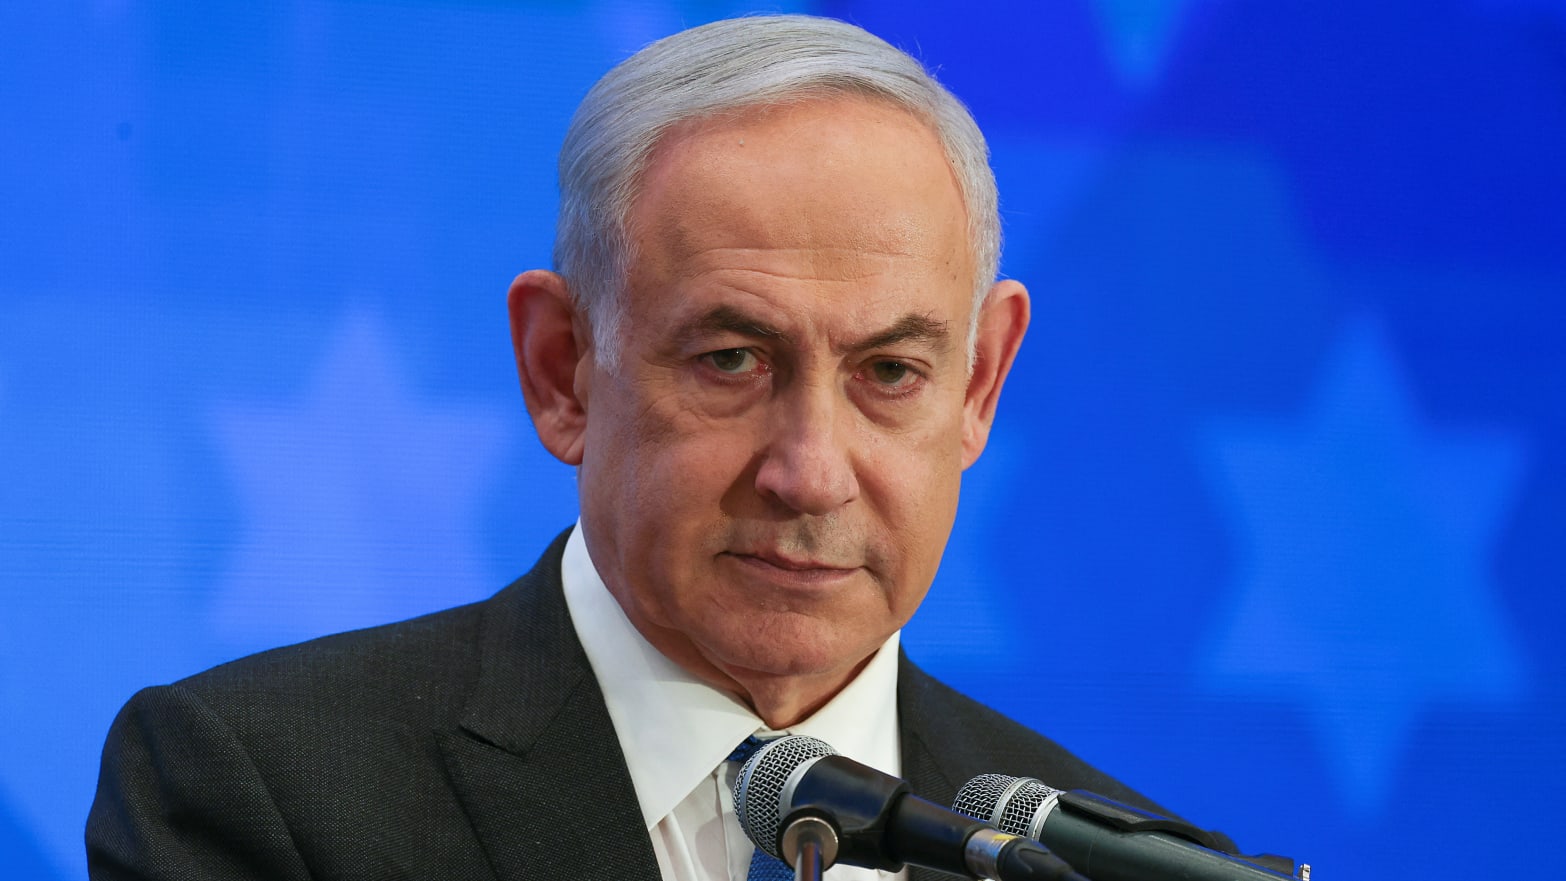 A senior Israeli political official accused the U.S. of attempting to oust Prime Minister Benjamin Netanyahu.